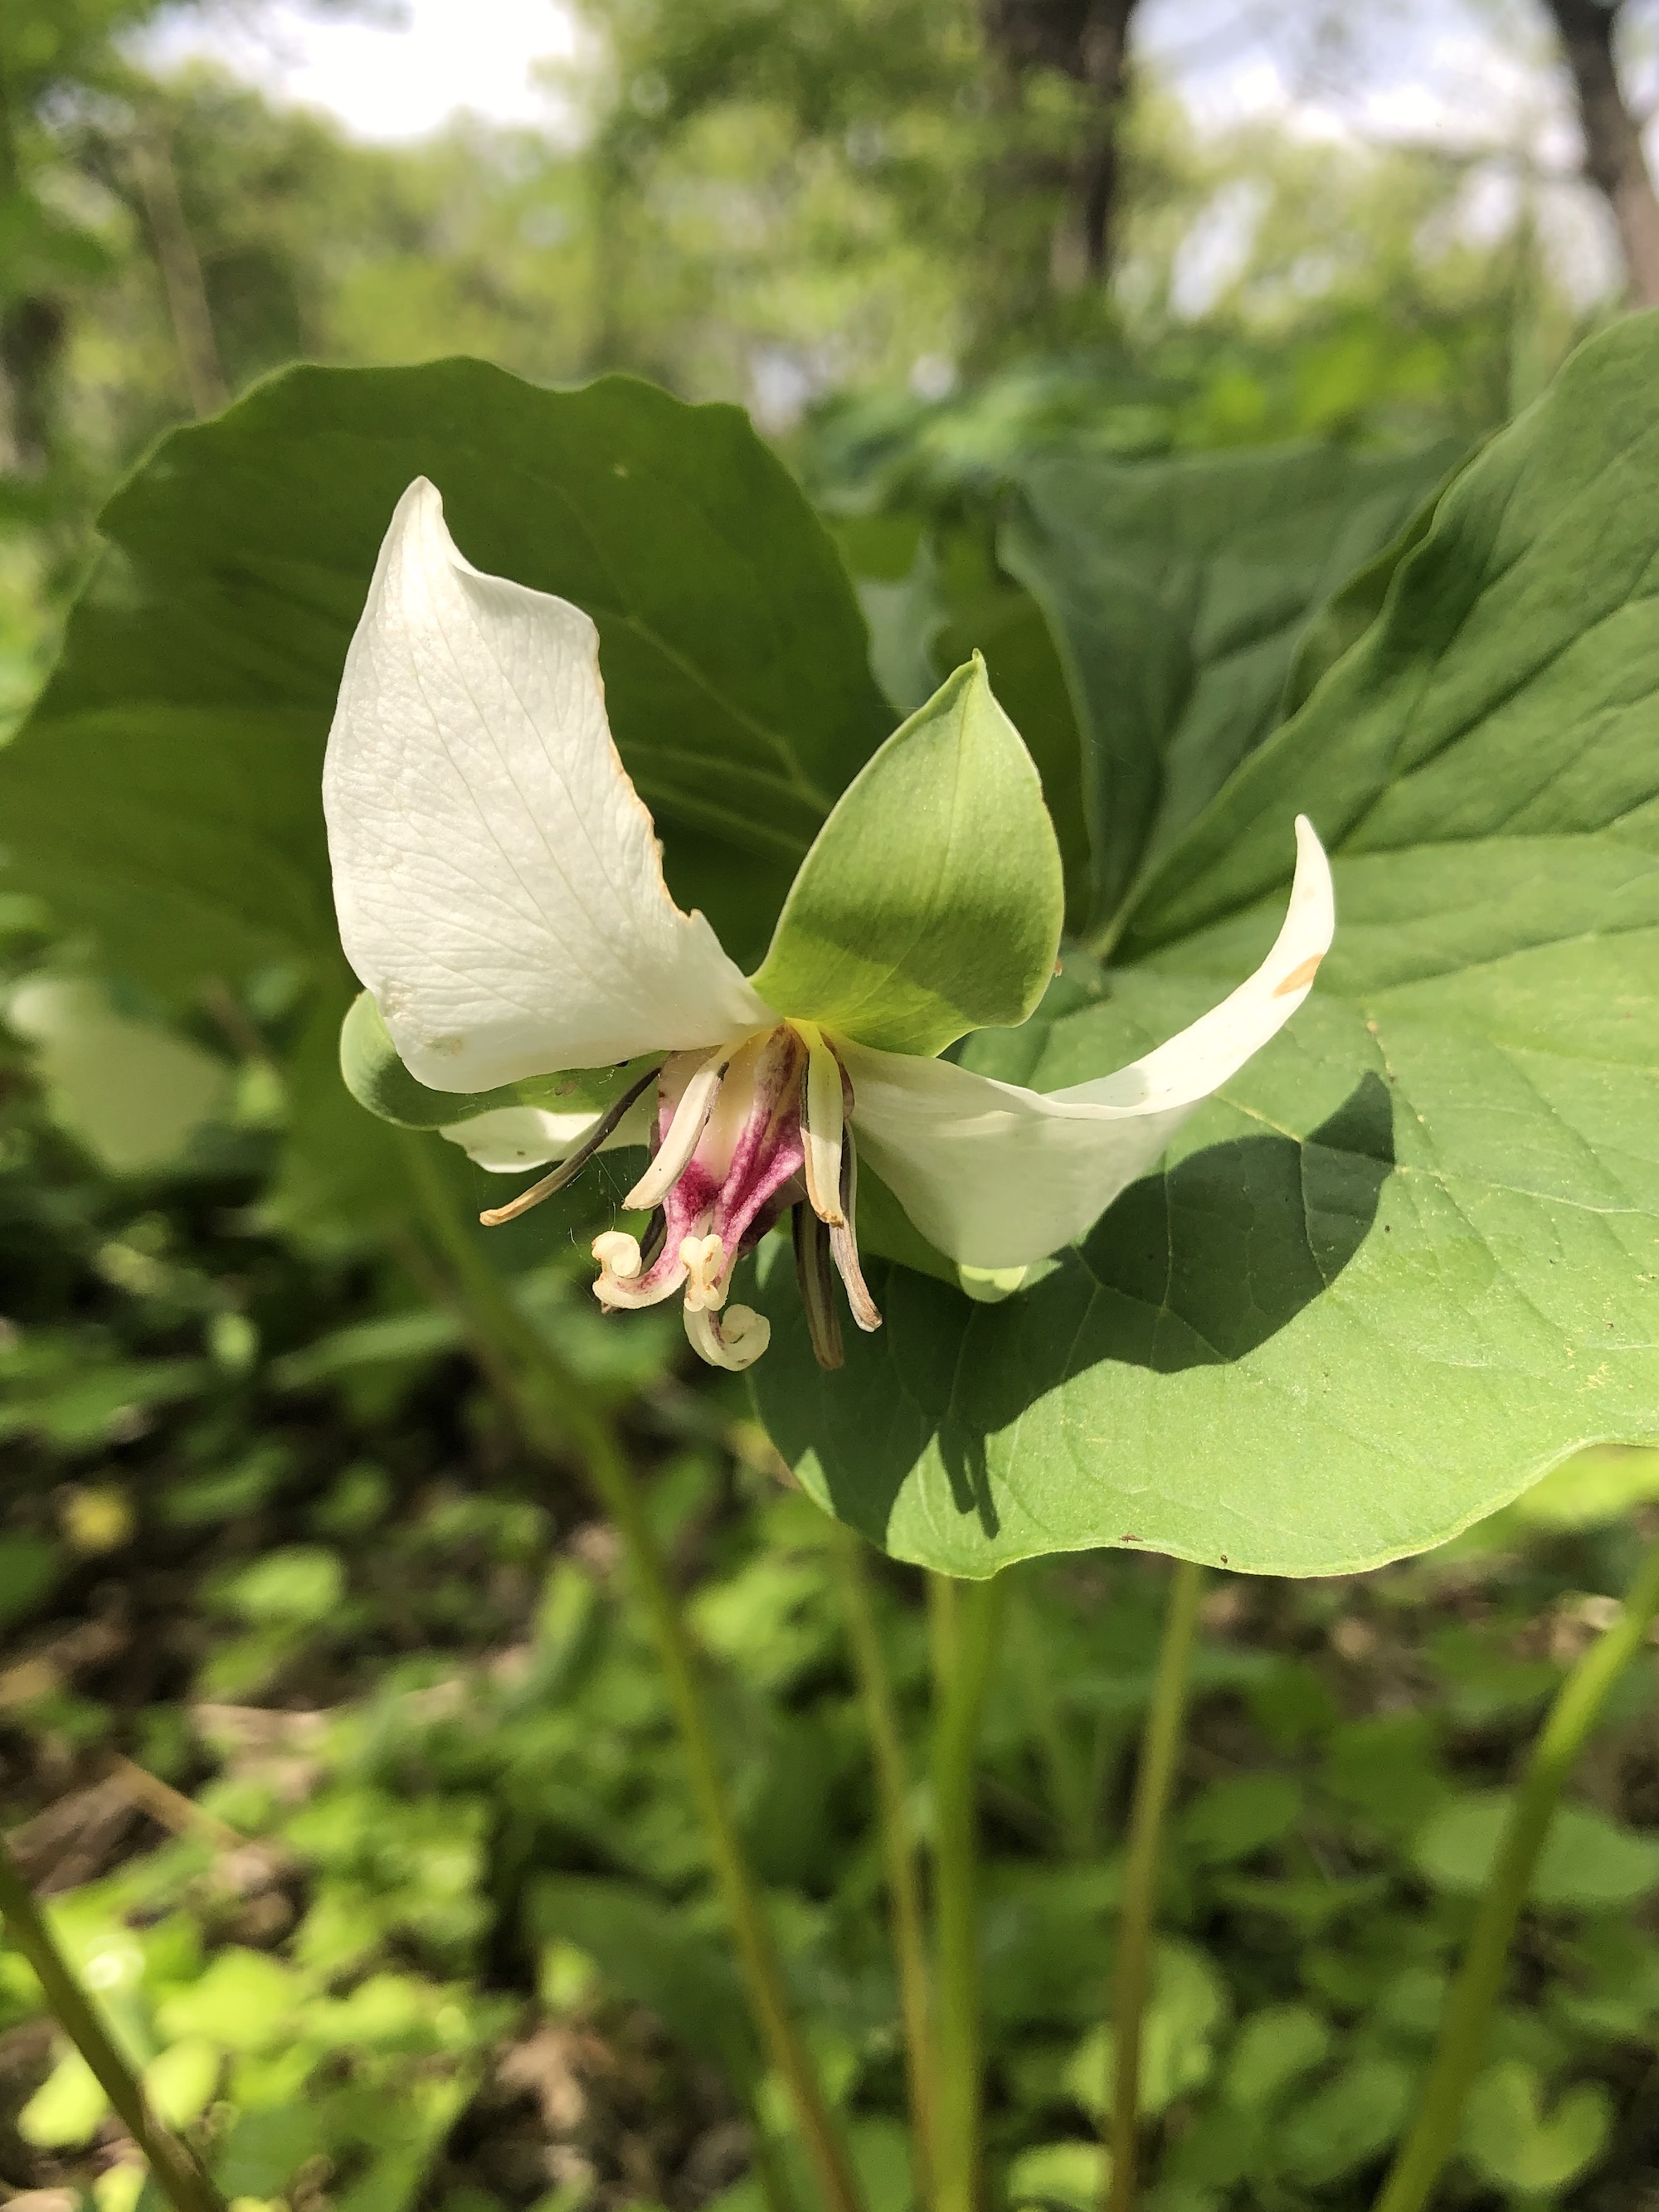 Drooping Trillium near Council Ring Spring in Madison, Wisconsin on May 16, 2021.